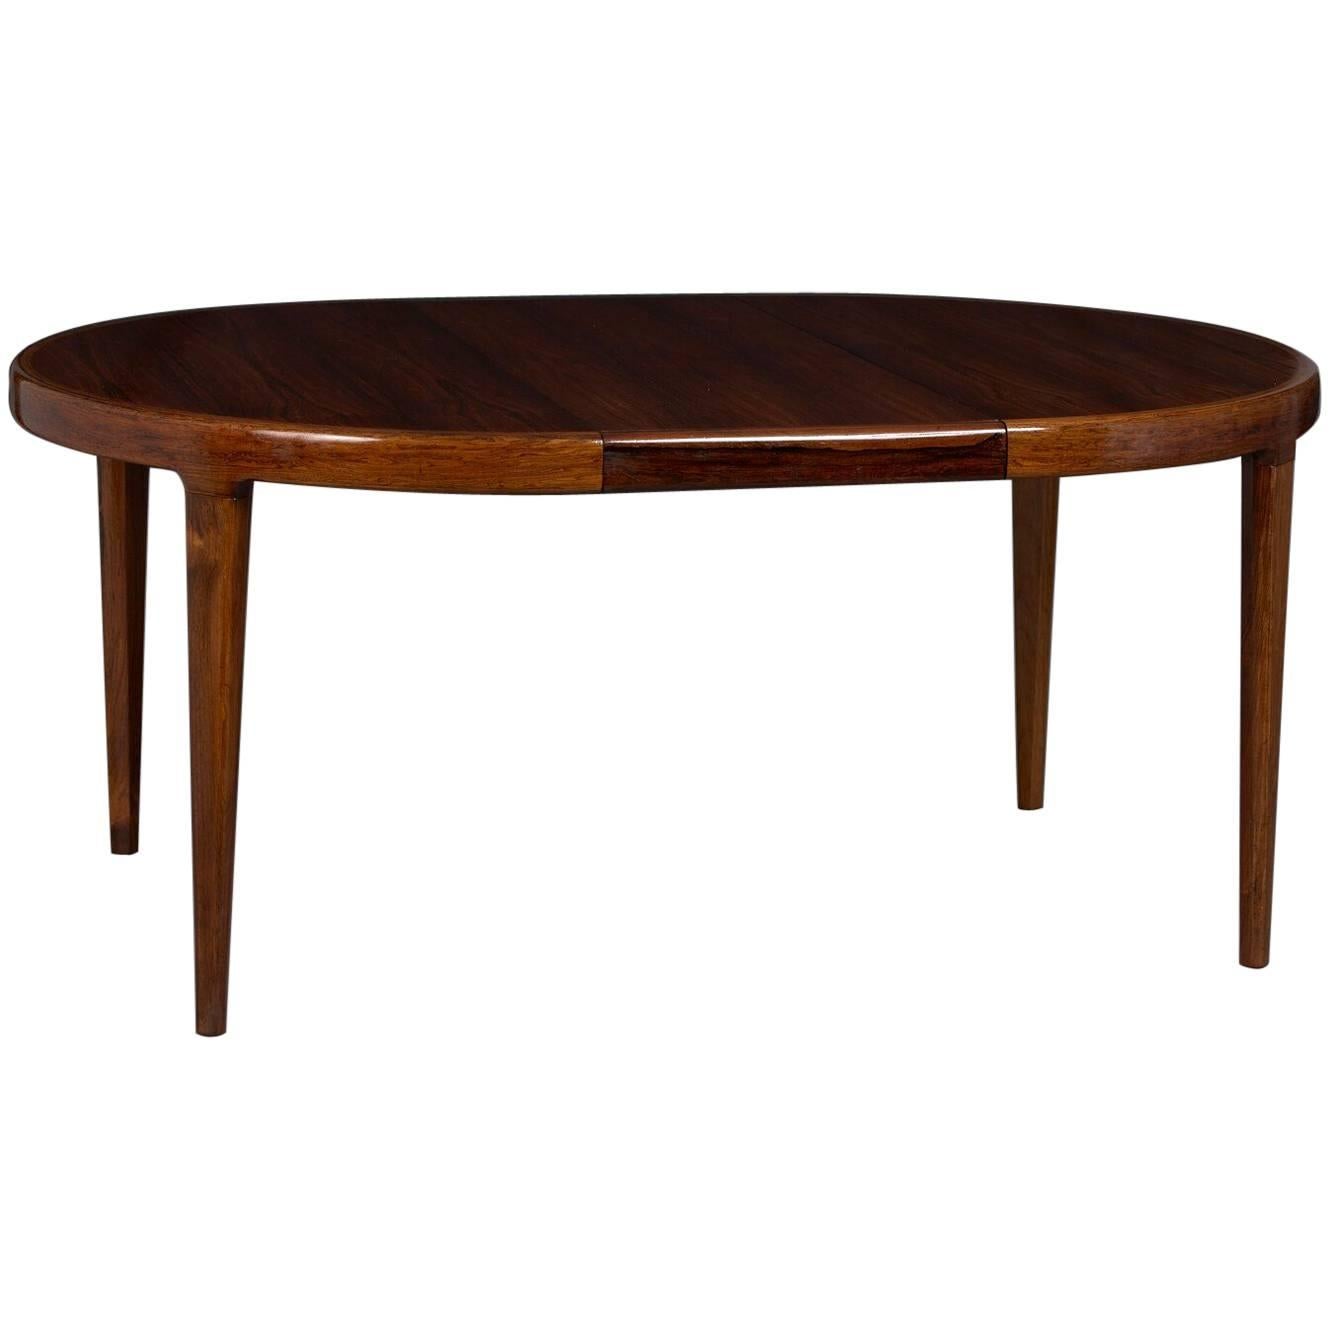 Danish Rosewood Extension Dining Table with Two Leaves